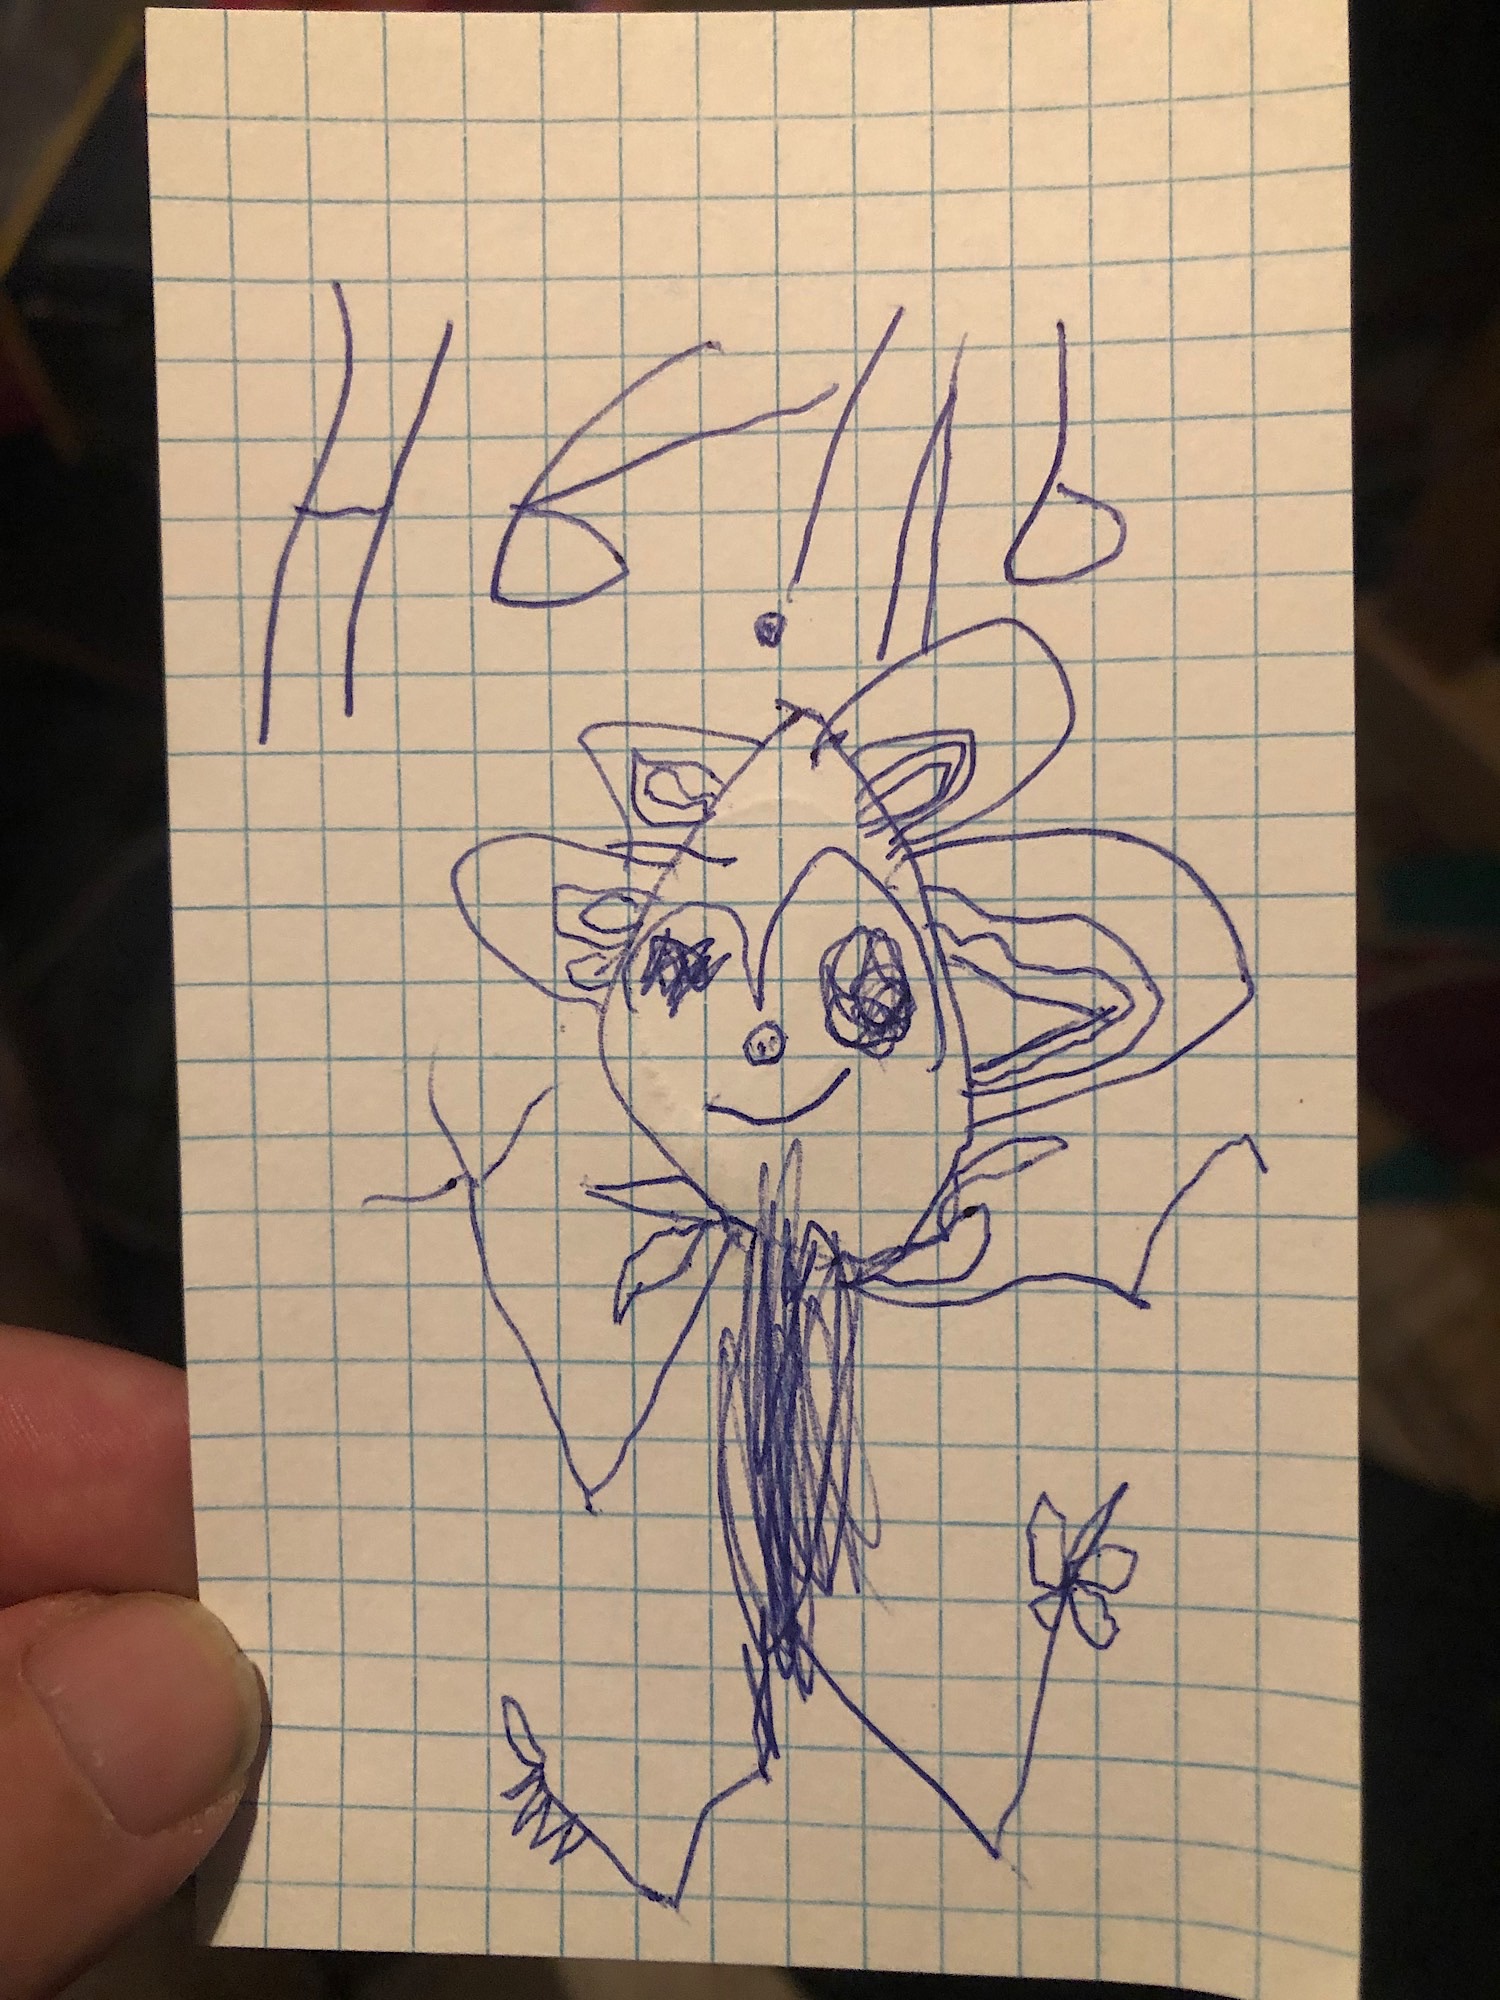 A child’s stick drawing of an evil girl with four ears